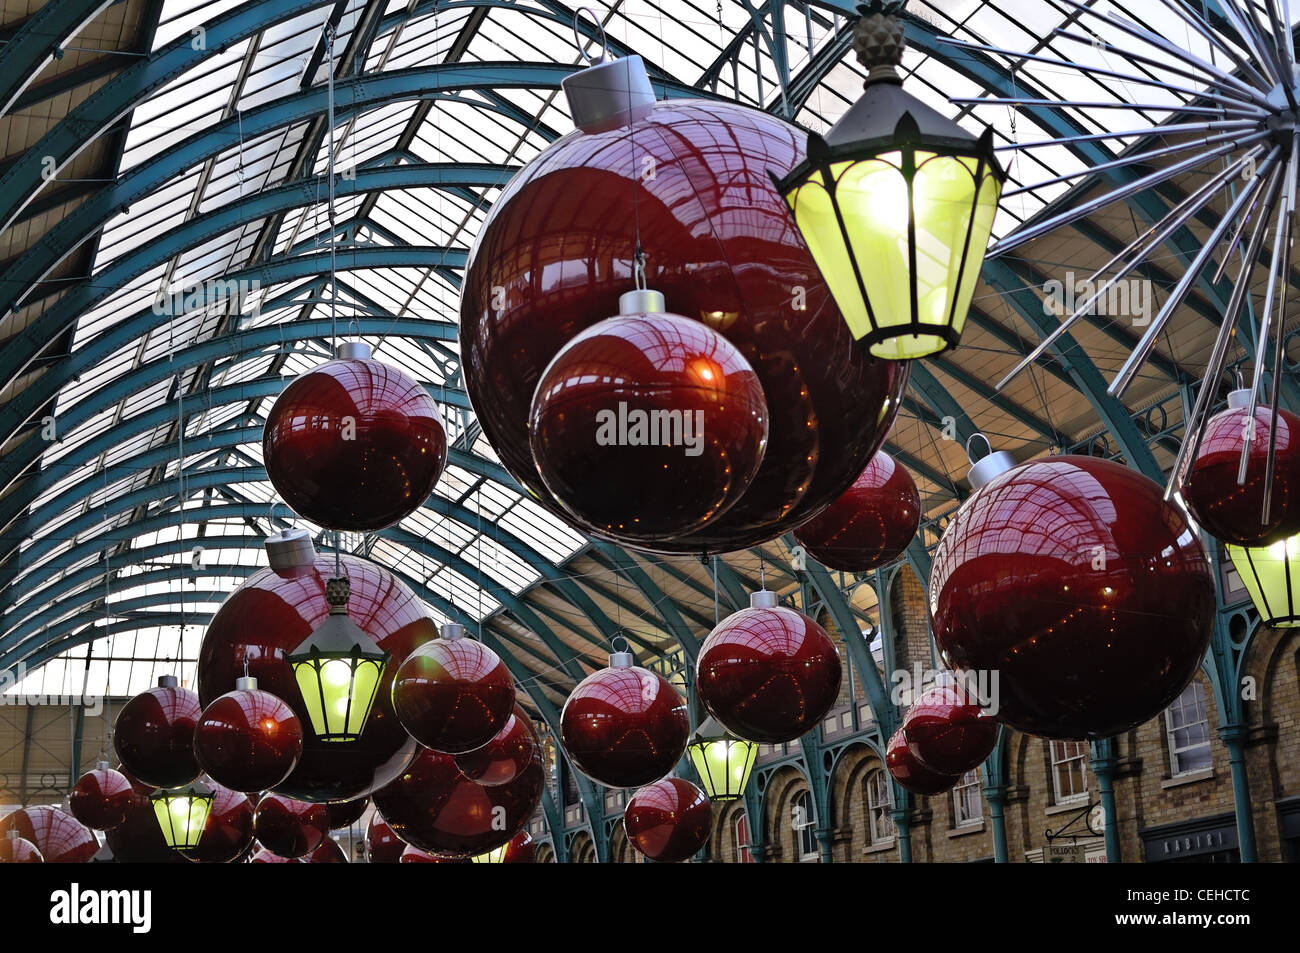 London: Christmas decoration in the Covent Garden Market Stock Photo